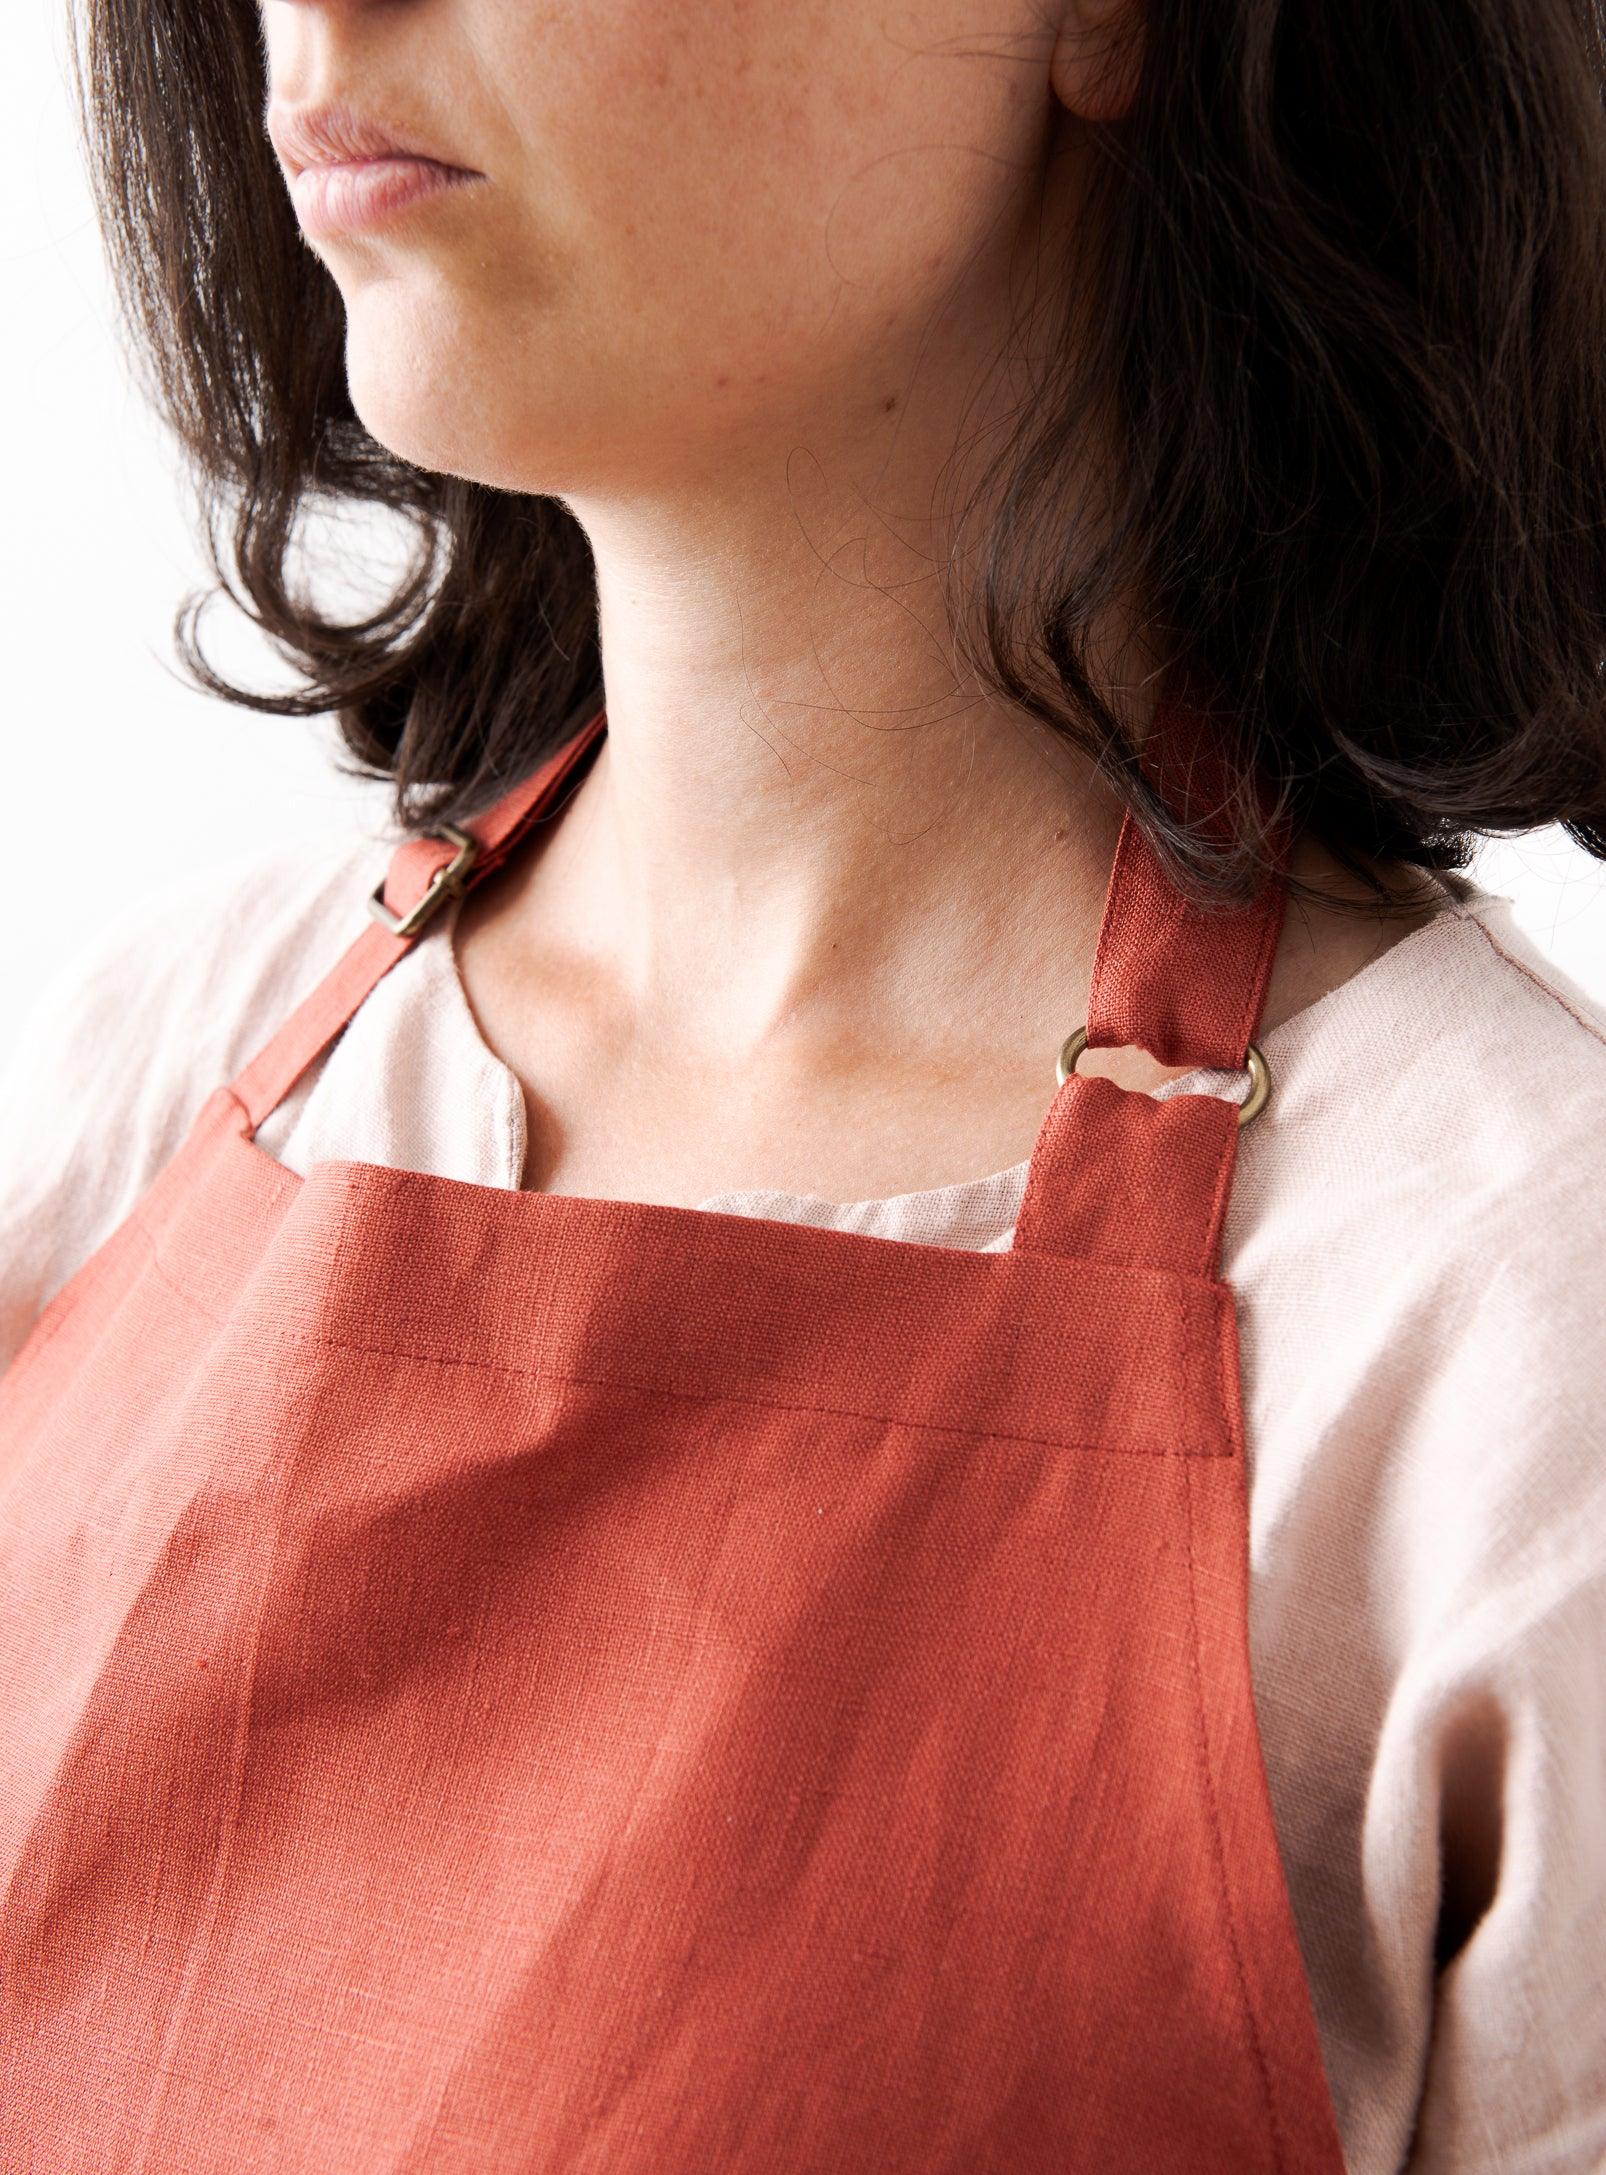 close-up view of a red apron adjustable on the neck with metal sliders